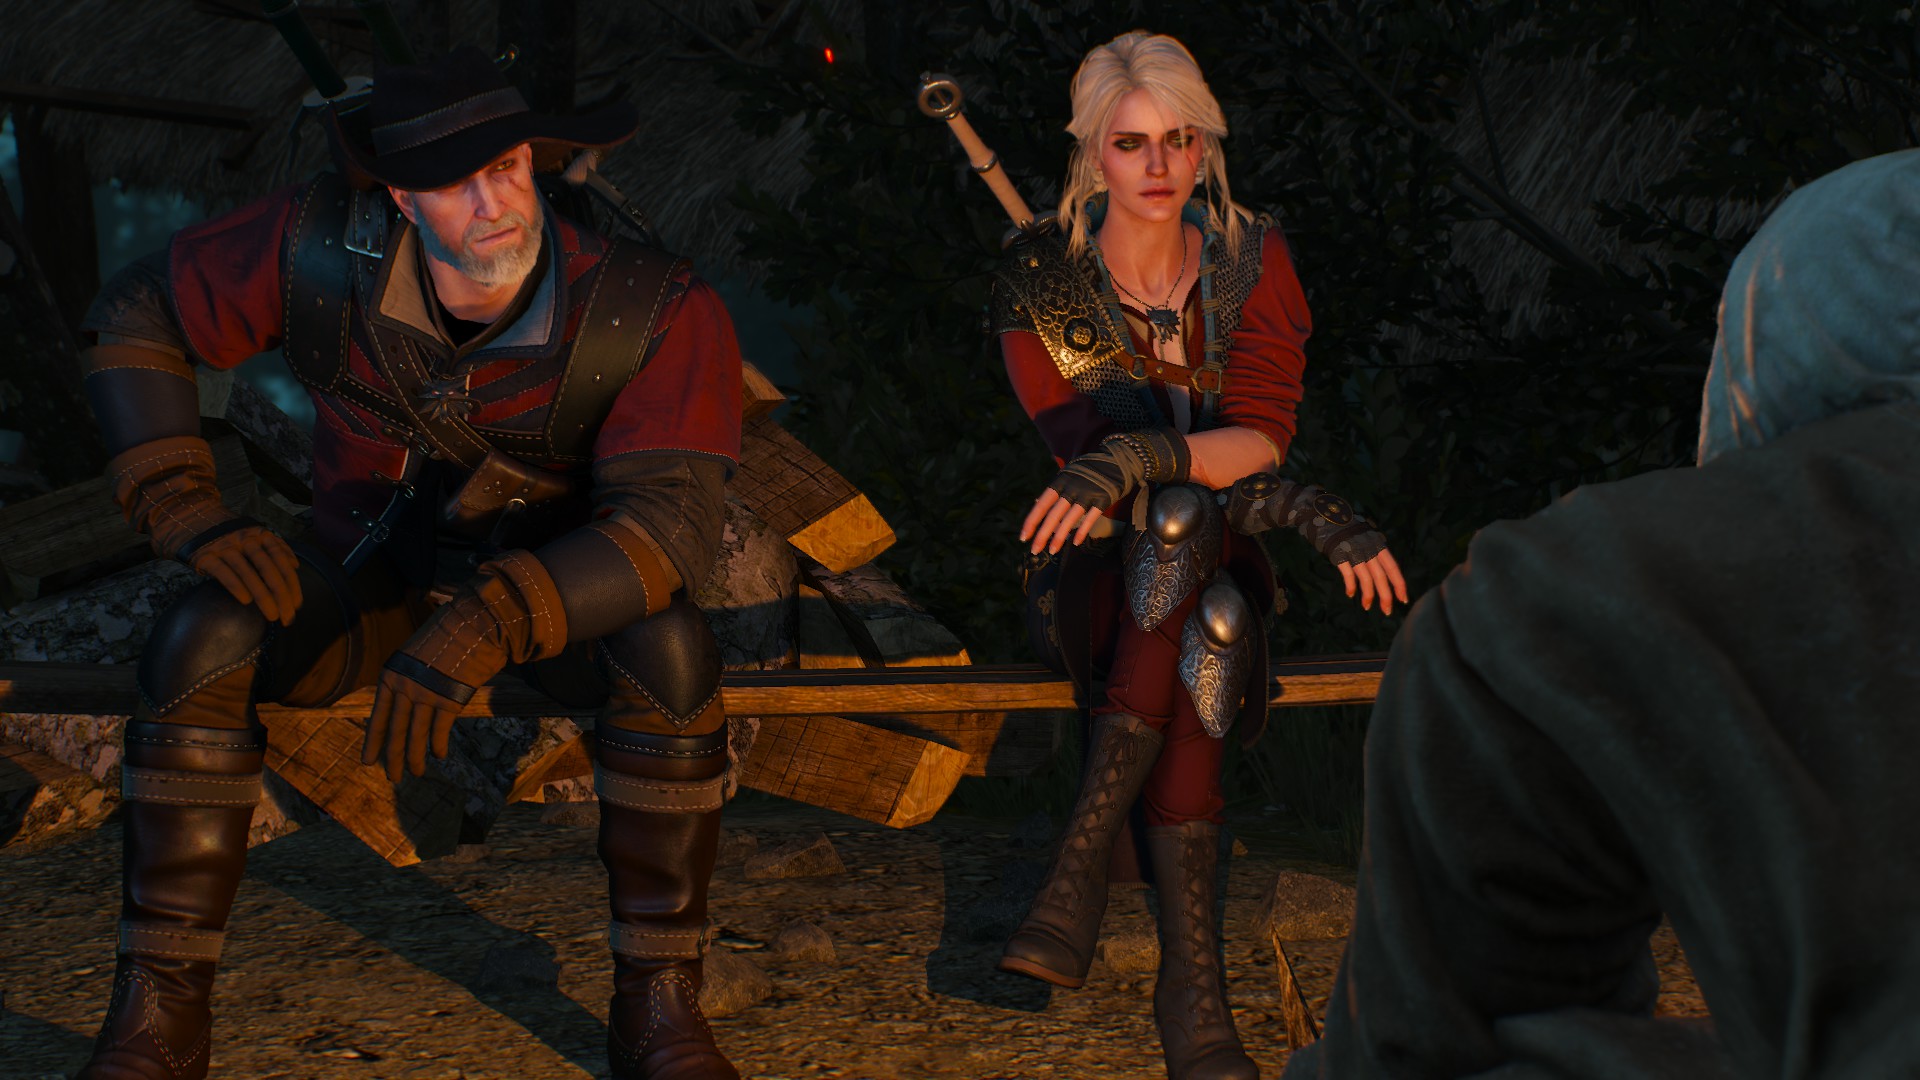 General 1920x1080 The Witcher 3: Wild Hunt School of the Wolf Geralt of Rivia Cirilla Fiona Elen Riannon CD Projekt RED video games video game characters